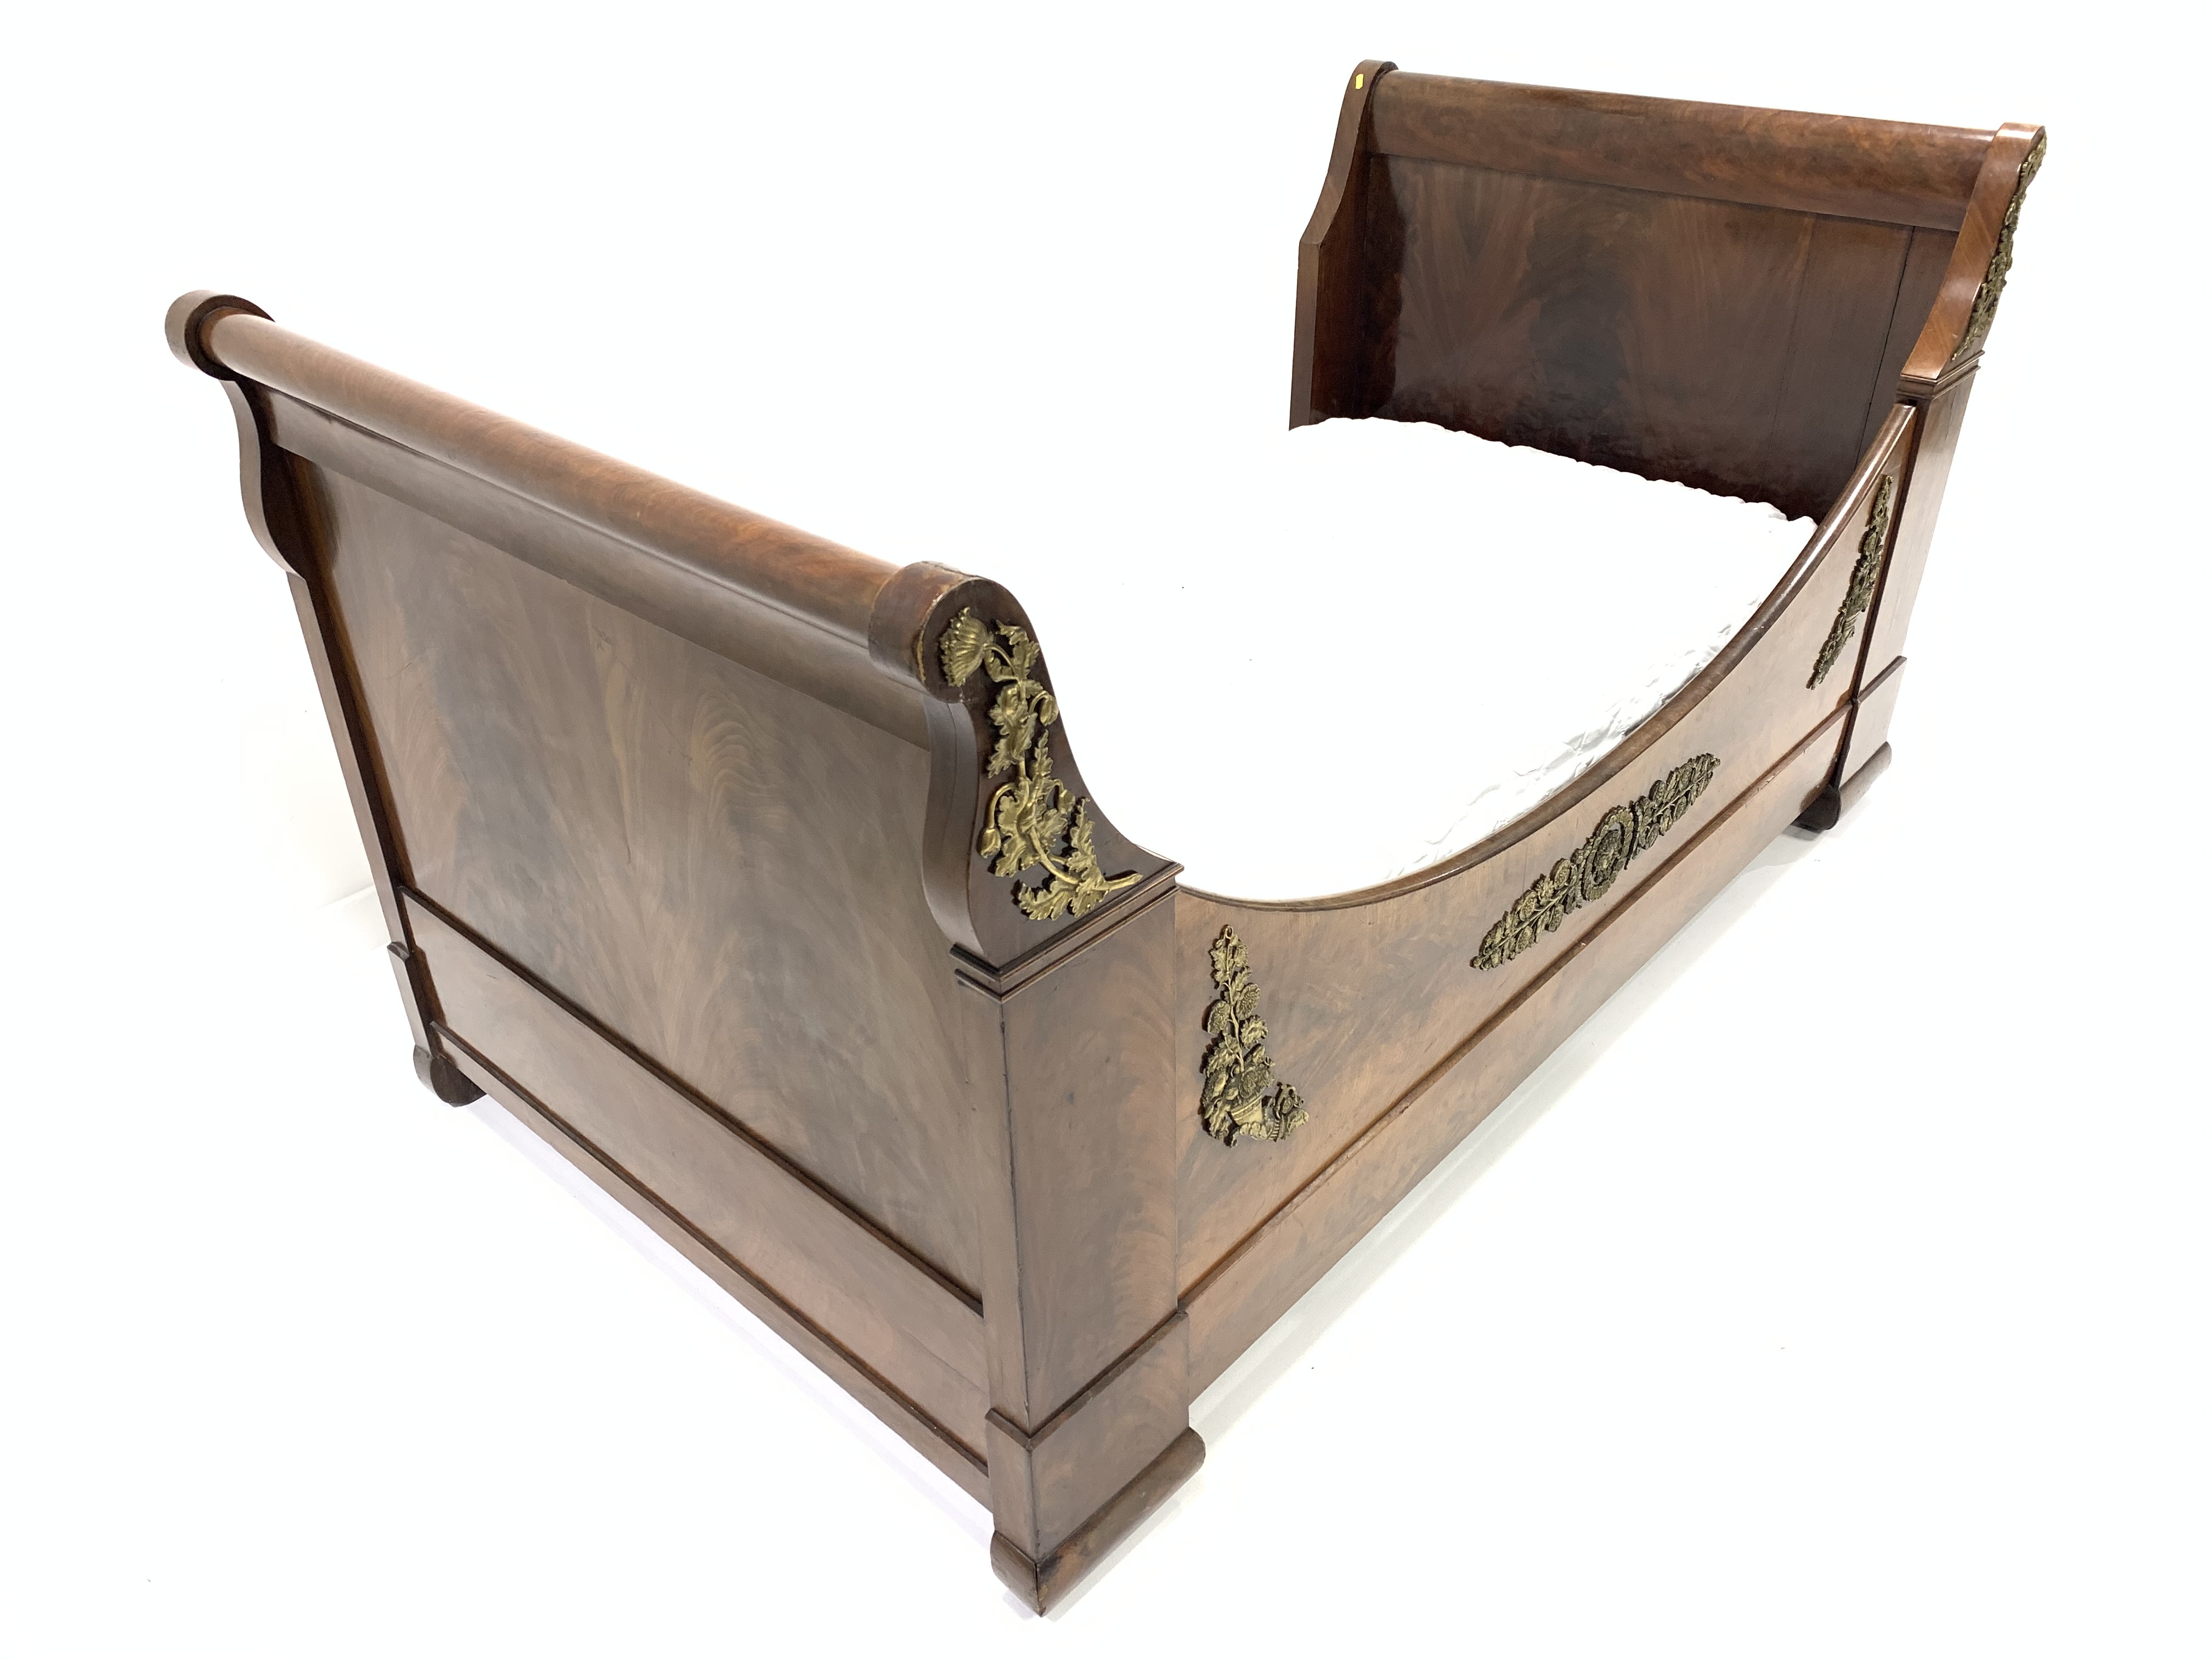 19th century mahogany French Empire design single 3' sleigh bed, with box base, embellished with gil - Image 4 of 5